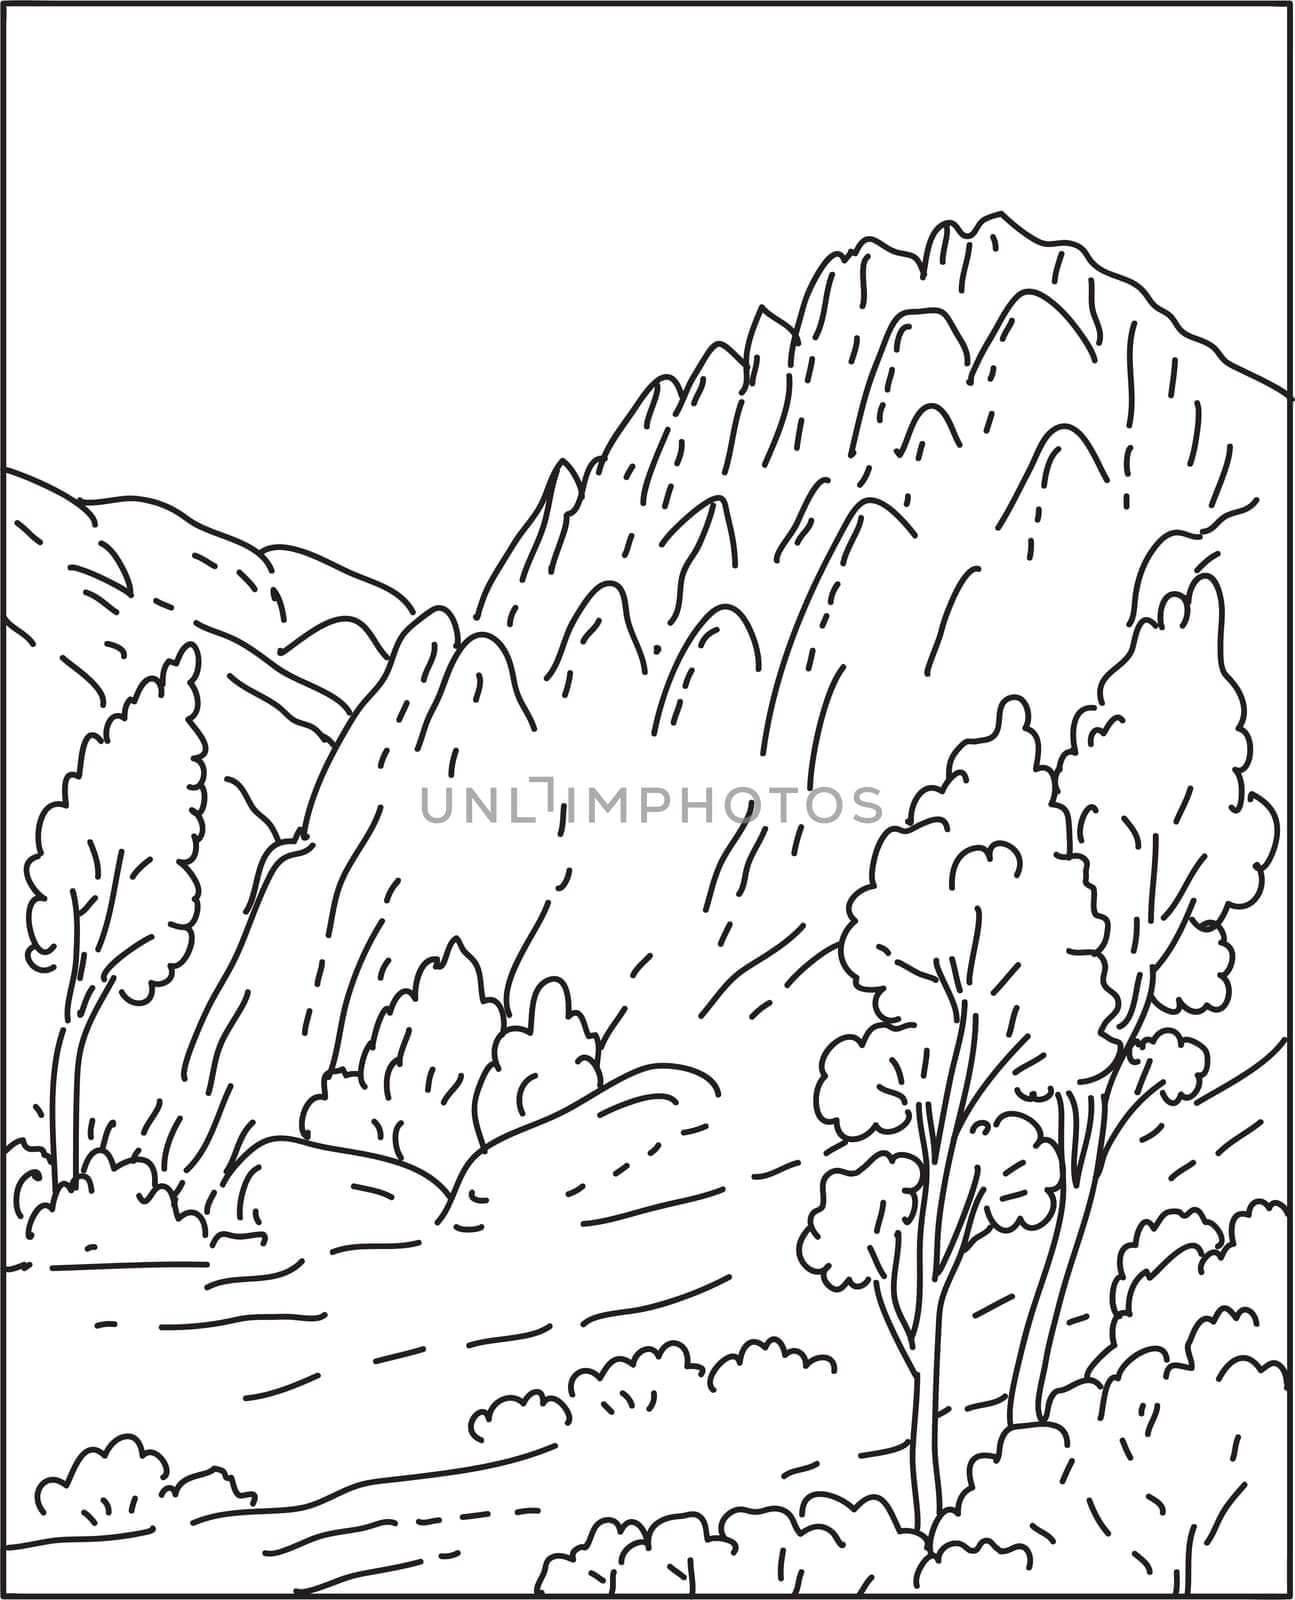 Pinnacles National Park of the Salinas Valley in Central California Mono Line Art by patrimonio